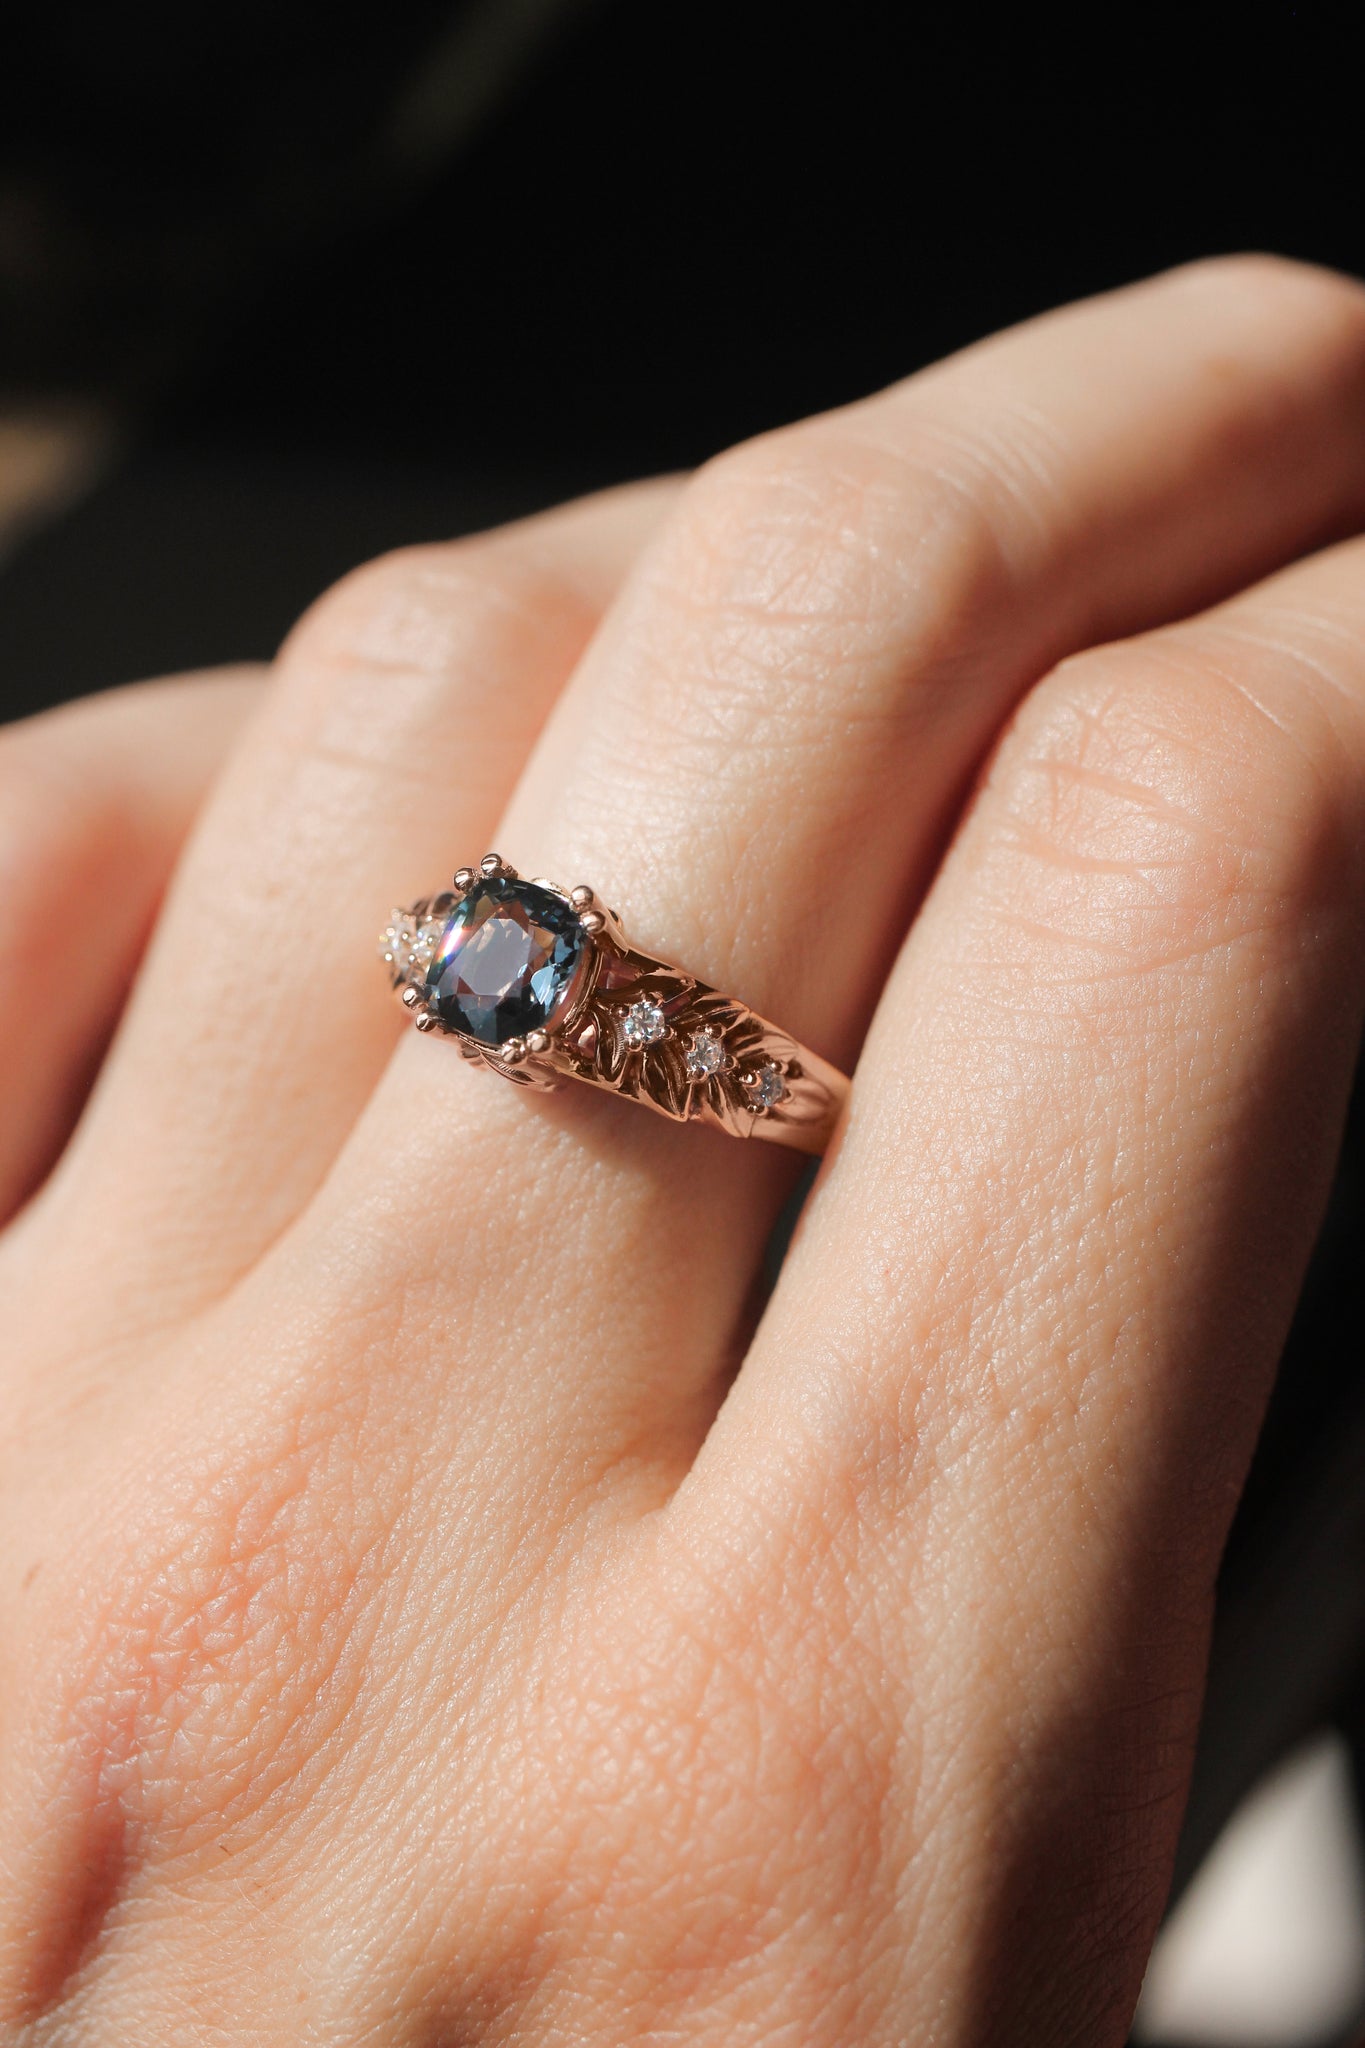 Grey spinel ring with diamonds, leaf engagement ring - Eden Garden Jewelry™